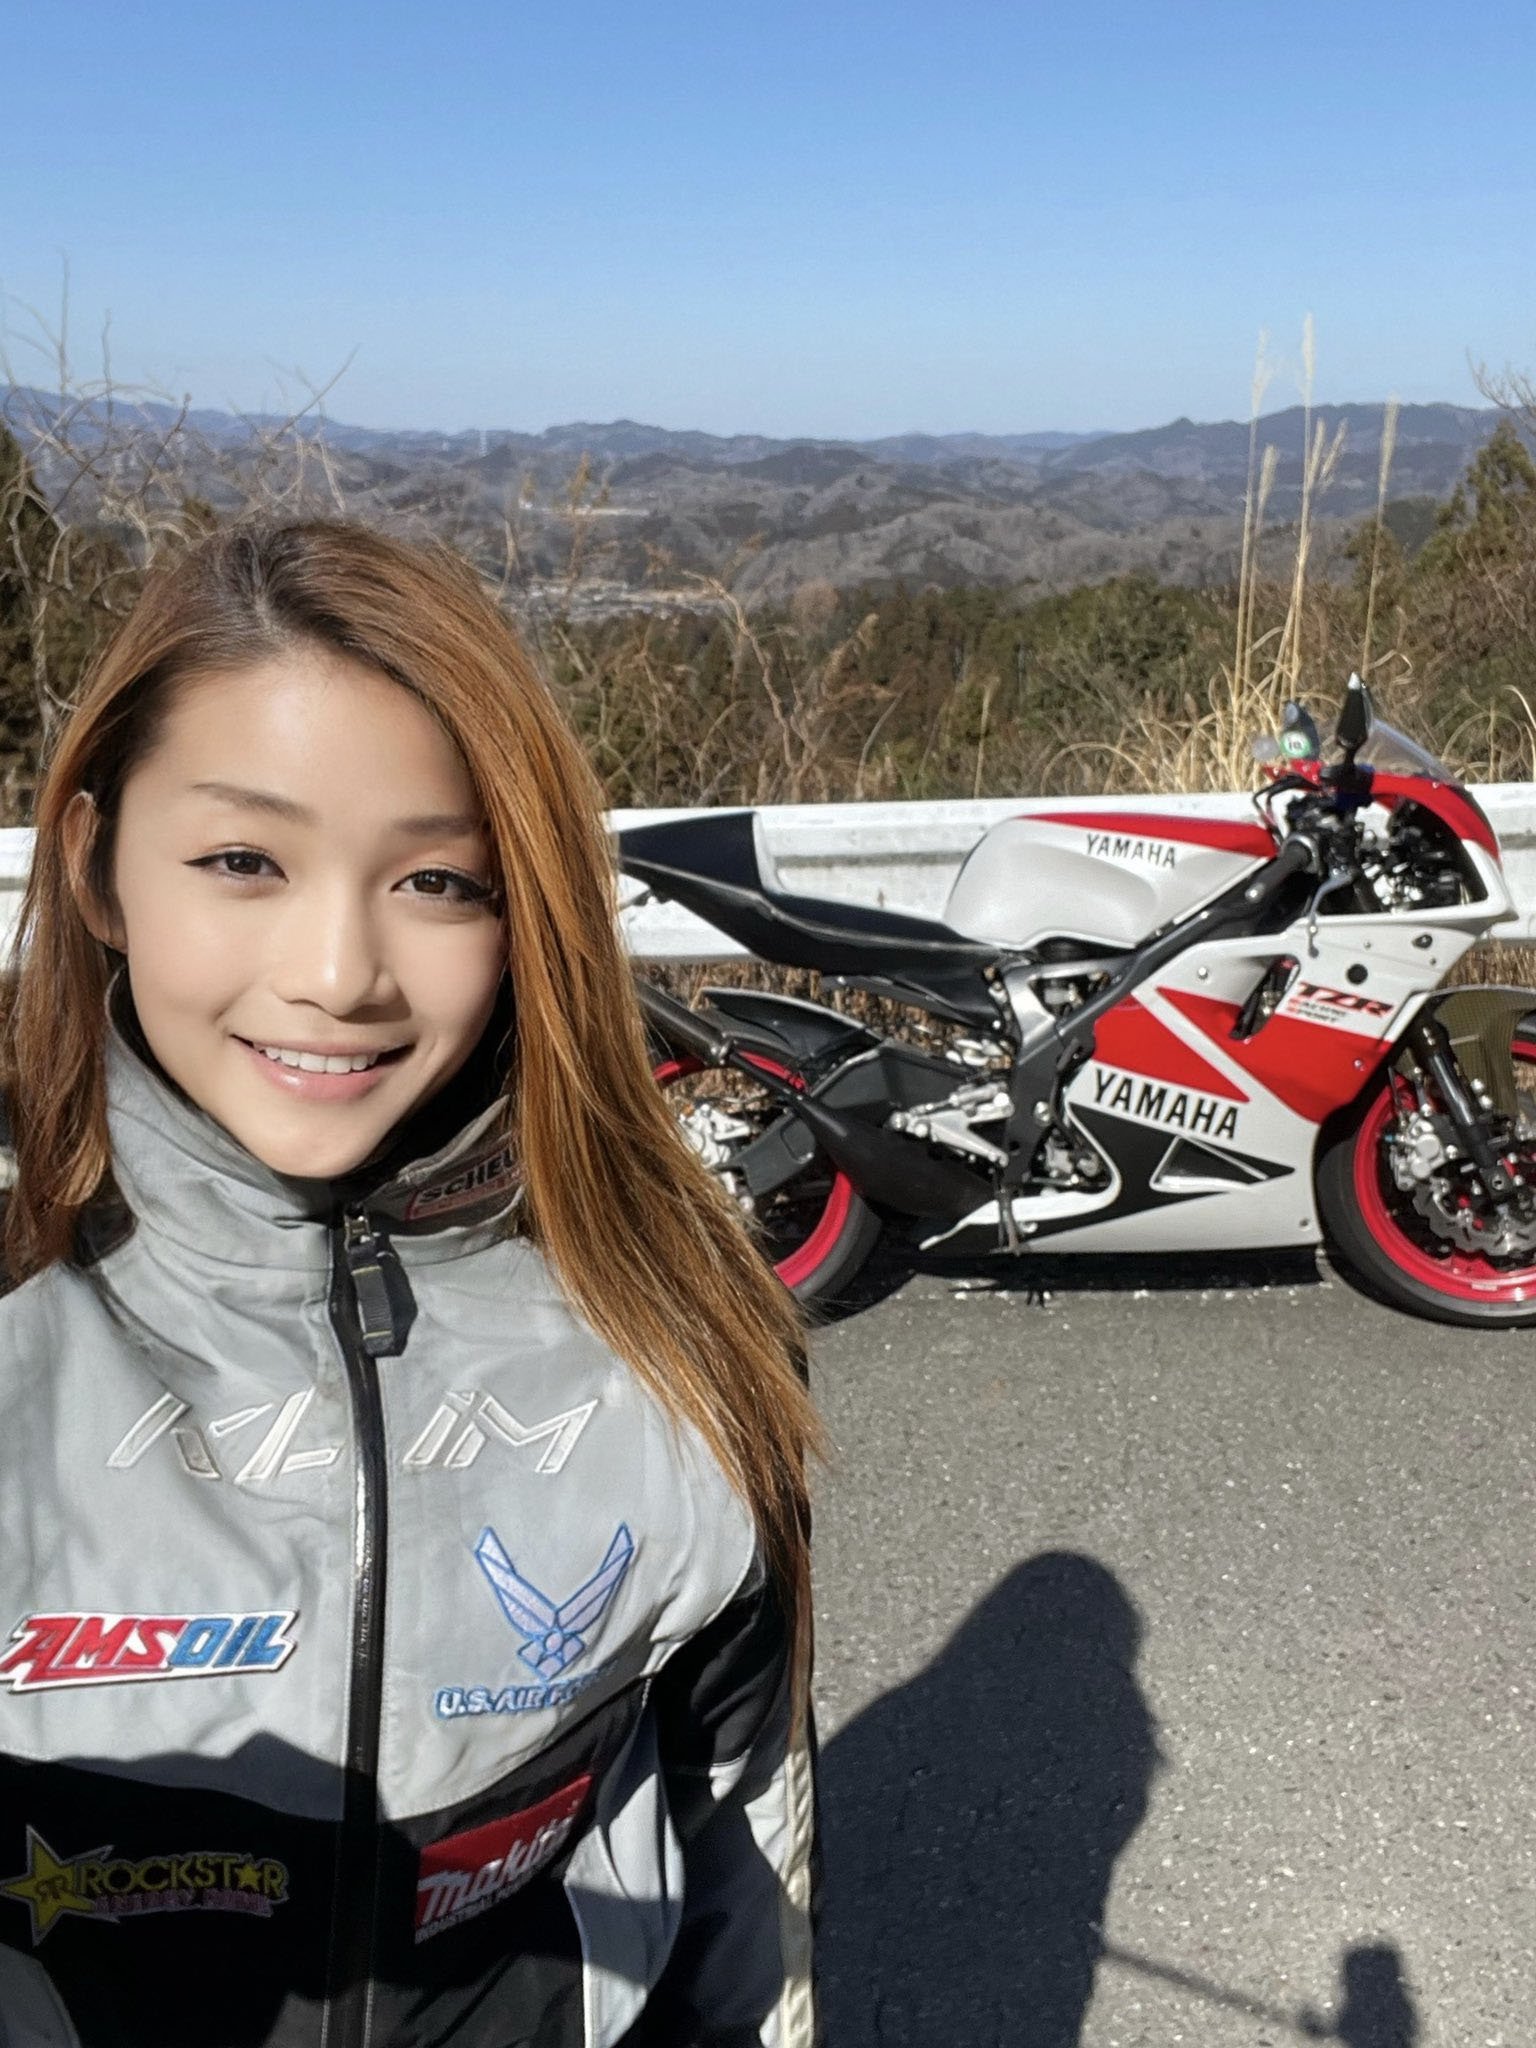 Female' Motorcyclist In Japan Goes Viral For Good Looks, Turns Out 